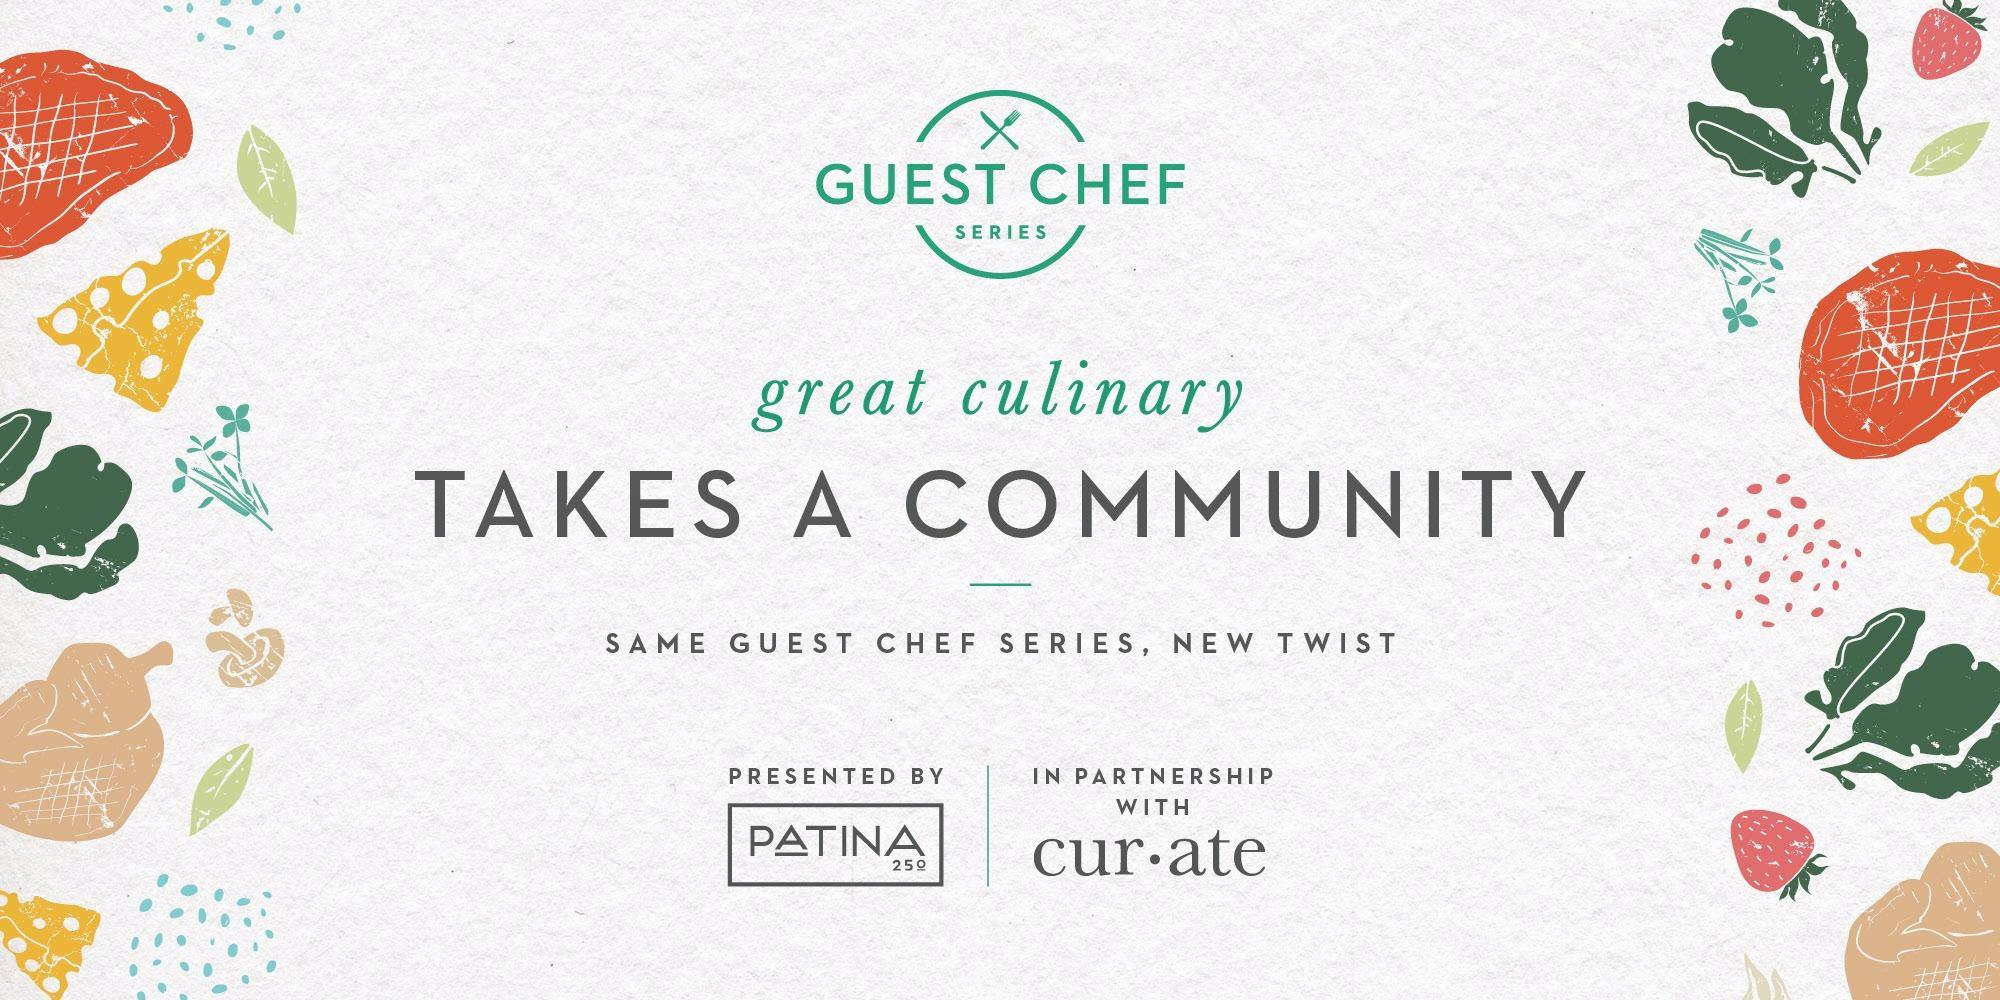 Patina 250 Guest Chef Series - Great Culinary Takes a Community